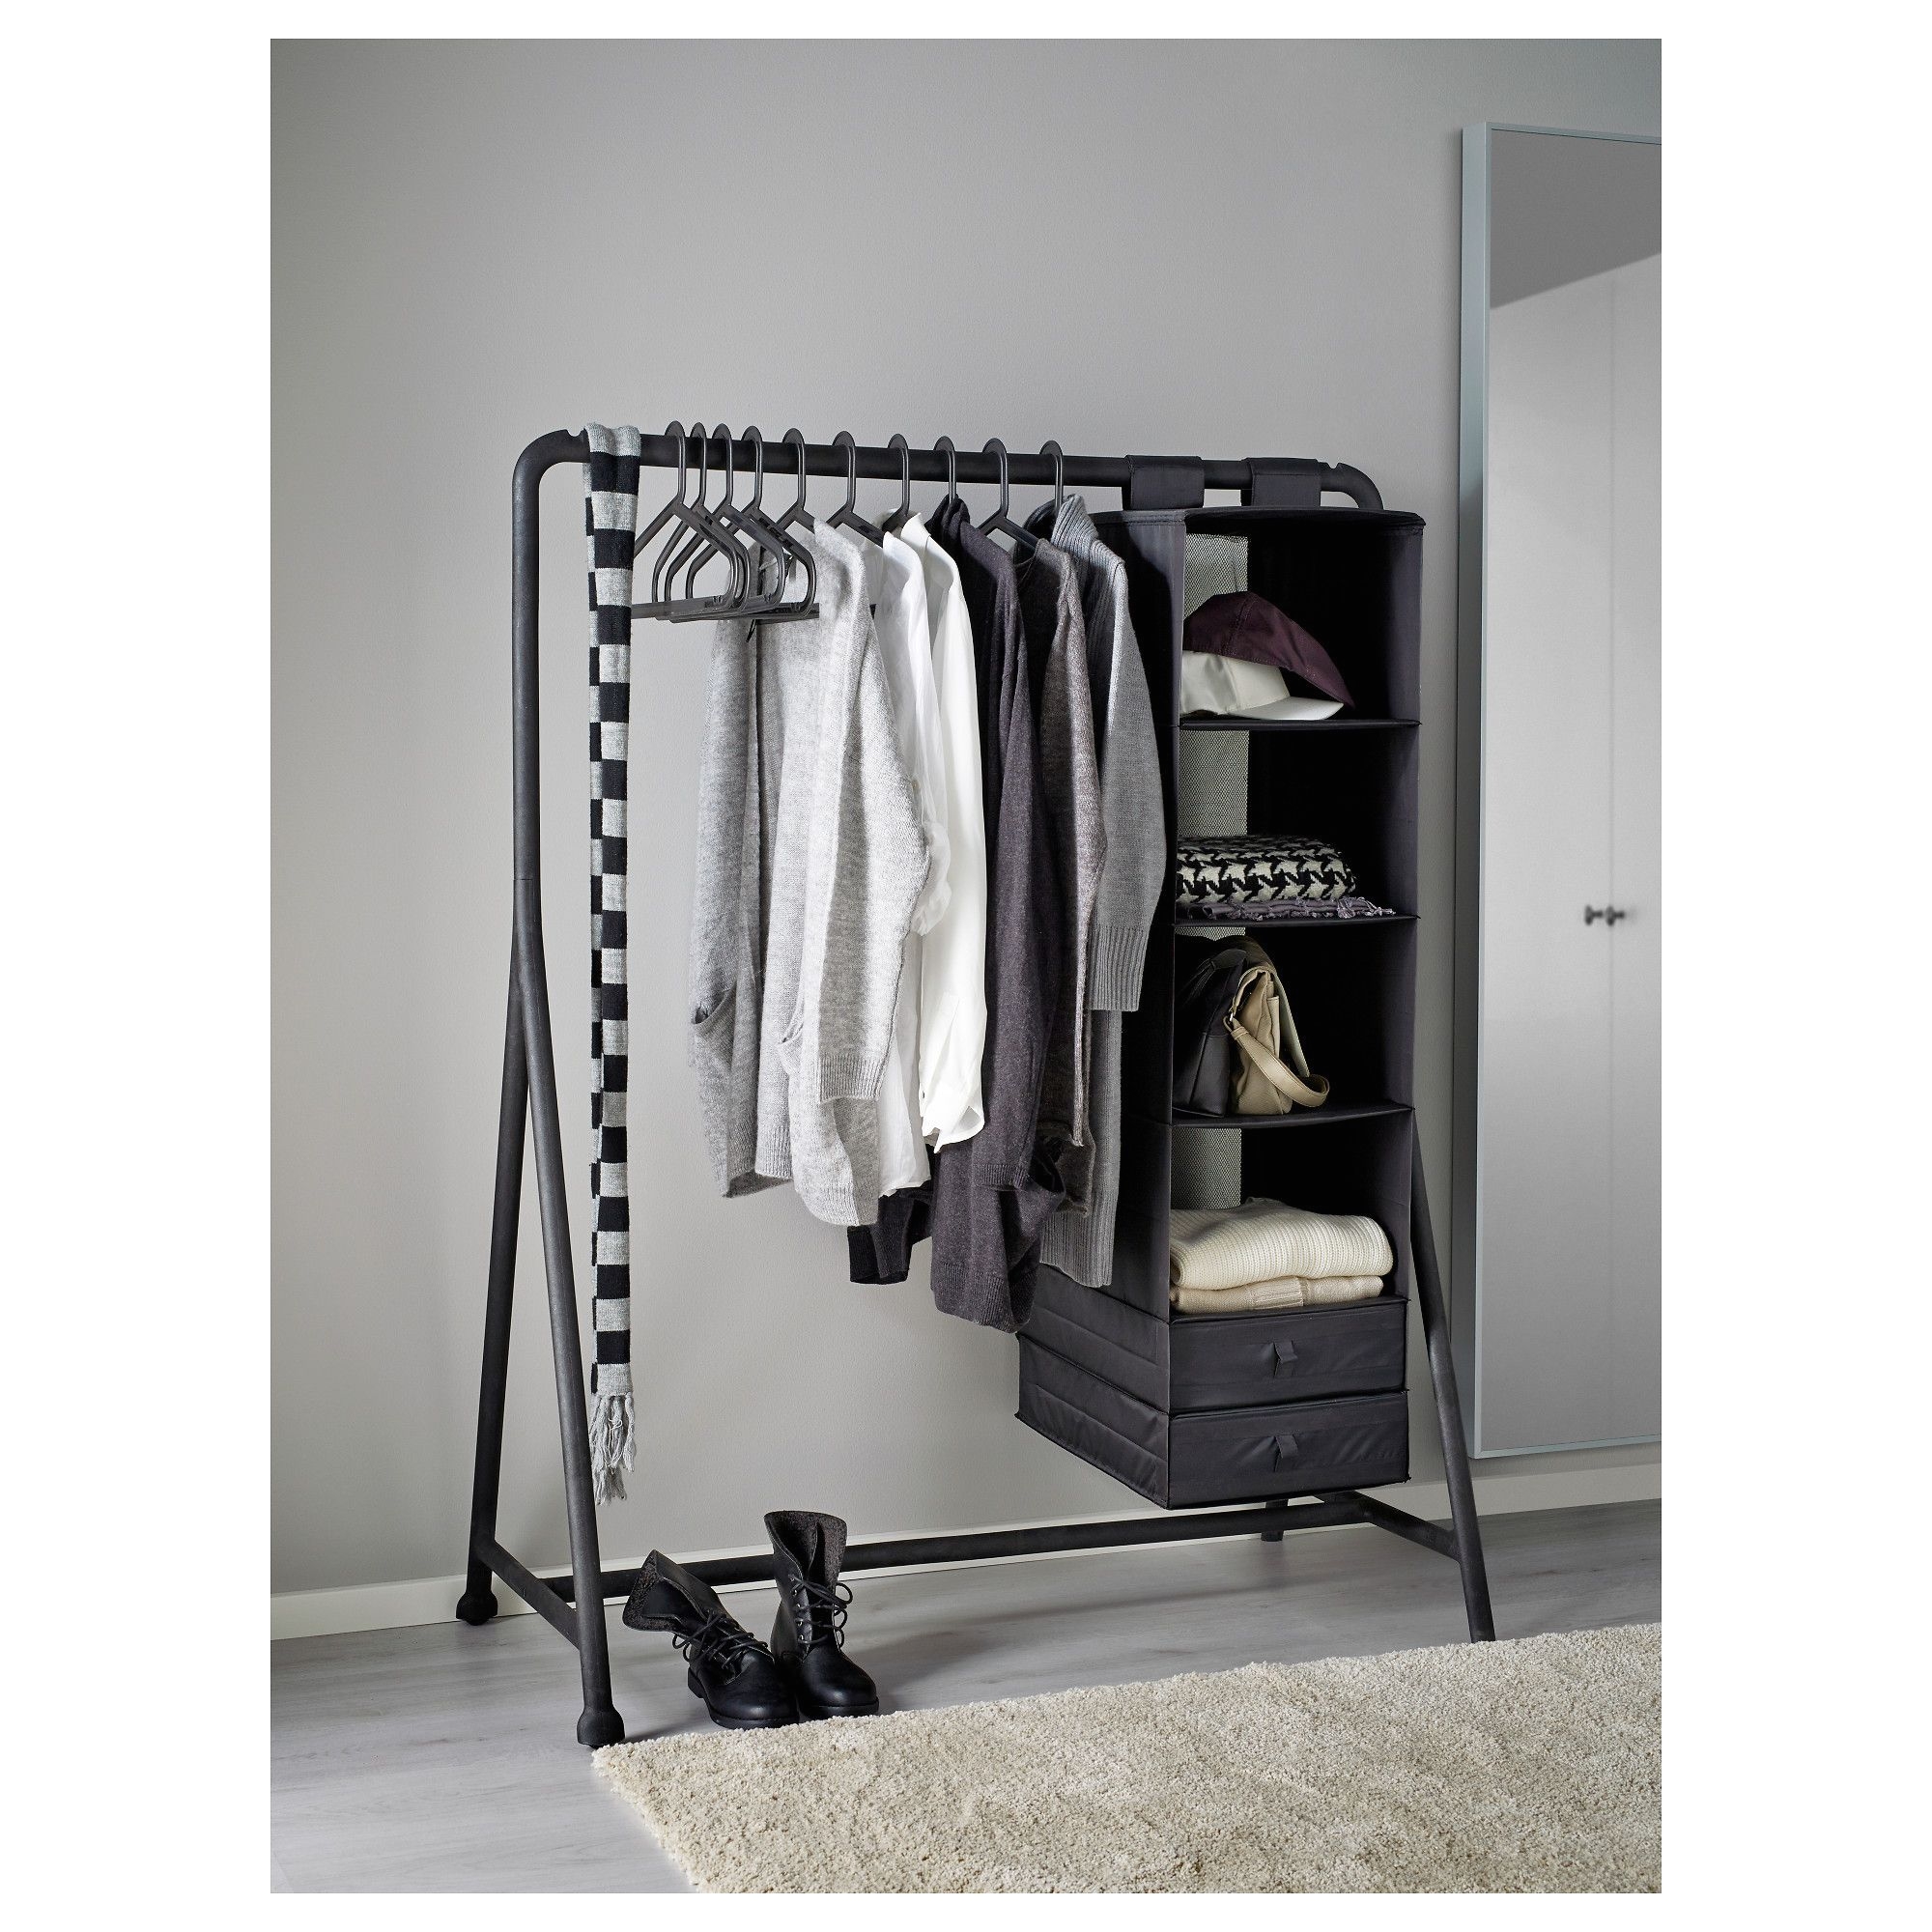 ikea turbo clothes rack in outdoor suitable for both indoor and outdoor use